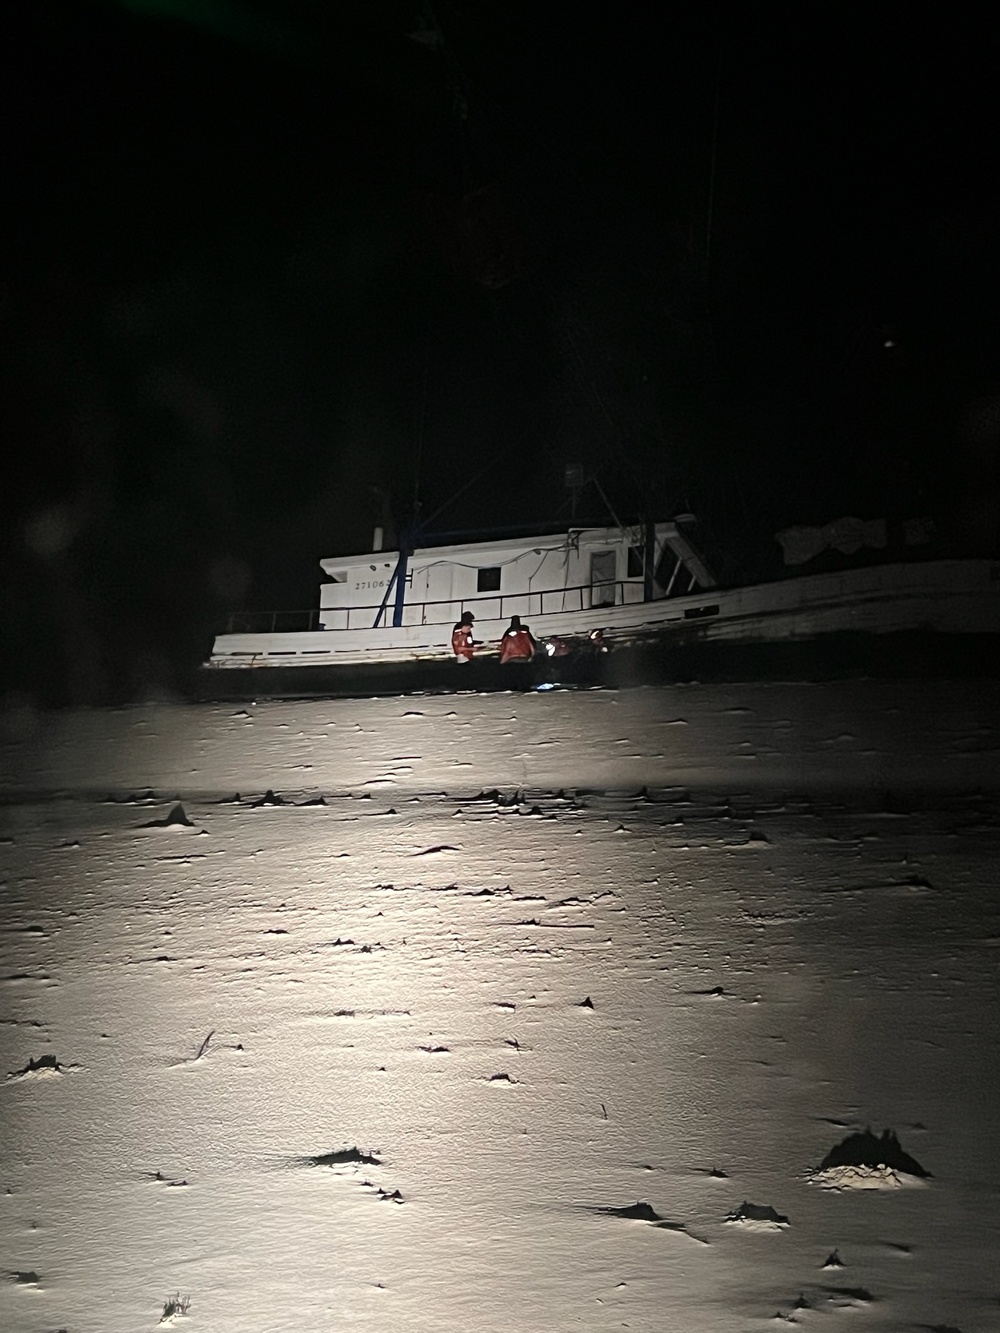 Coast Guard rescues 3 boaters from vessel taking on water near Pascagoula, Miss.